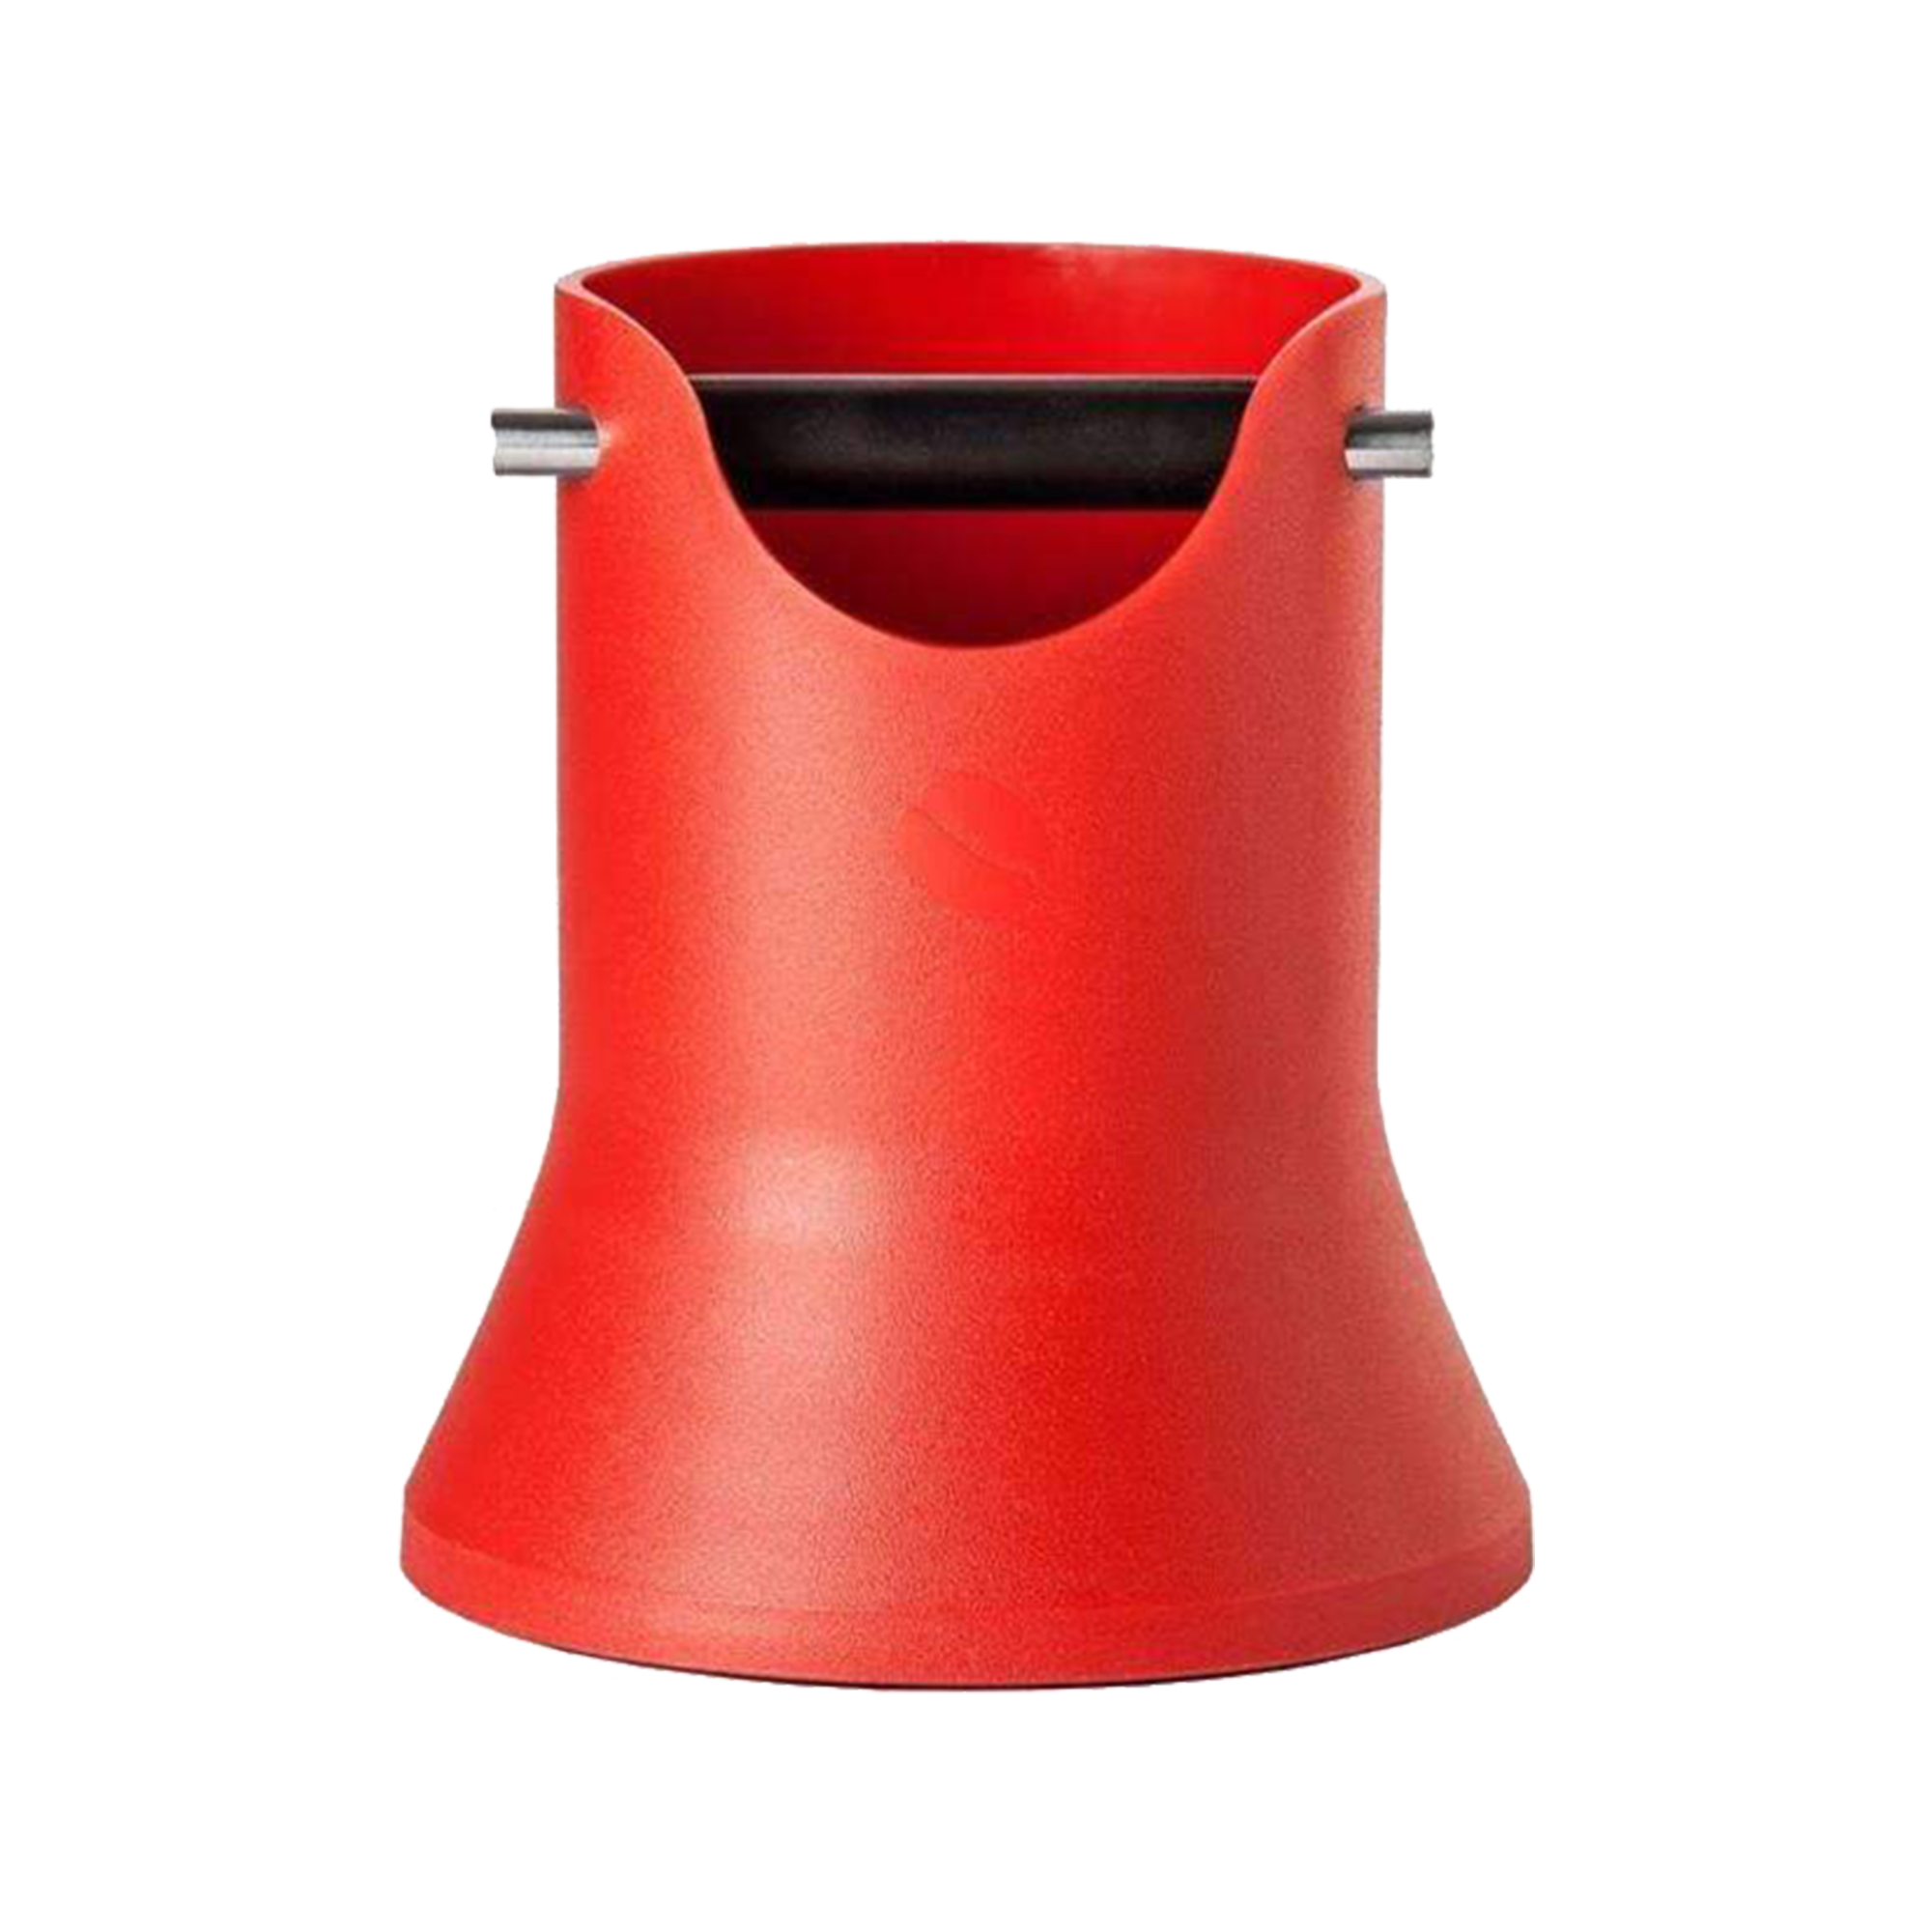 Knock Box 175mm - Red